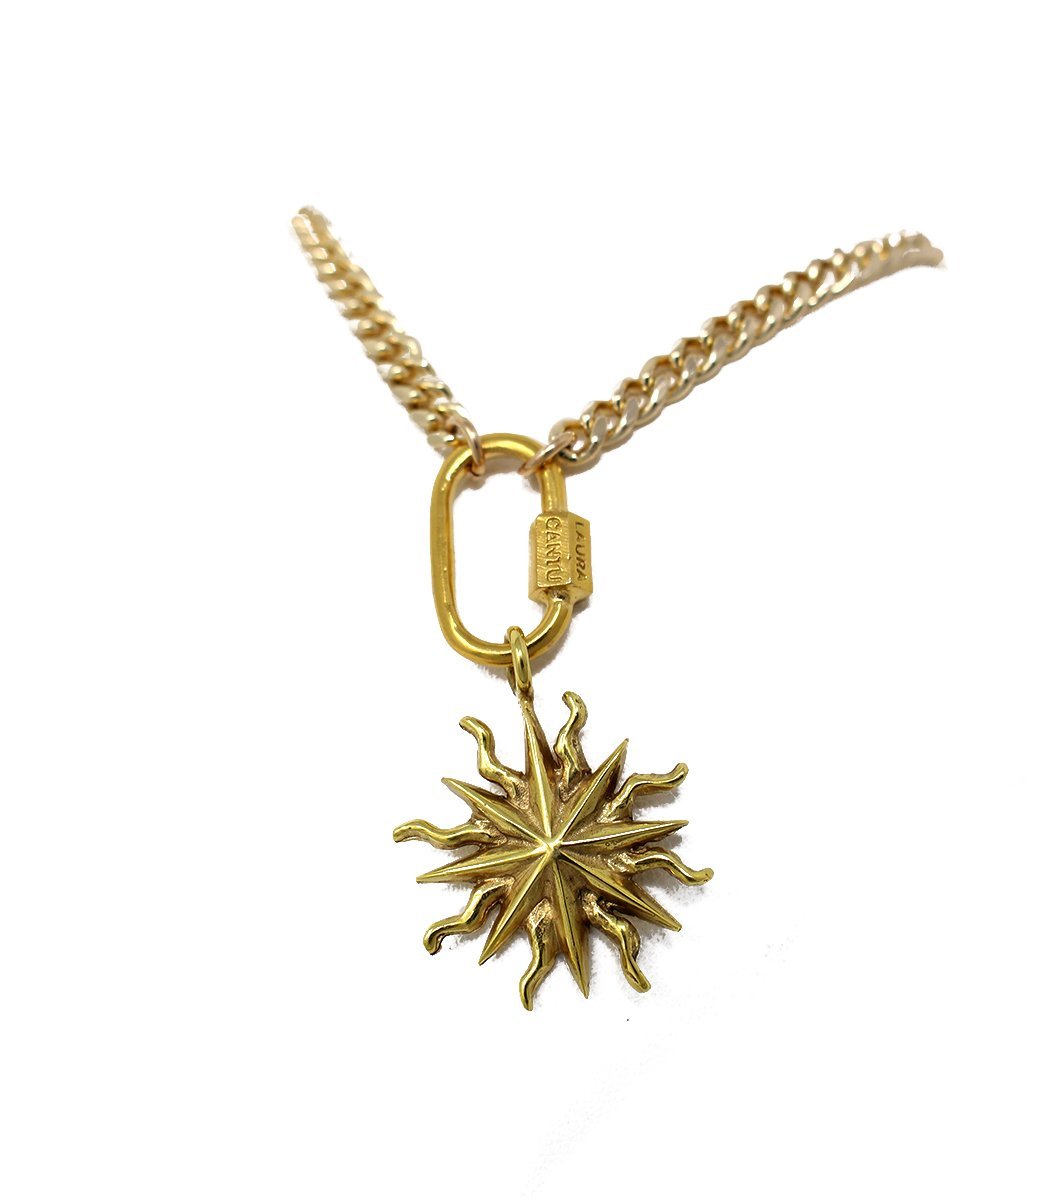 Eight pointed star necklace - Laura Cantu Jewelry - Mx